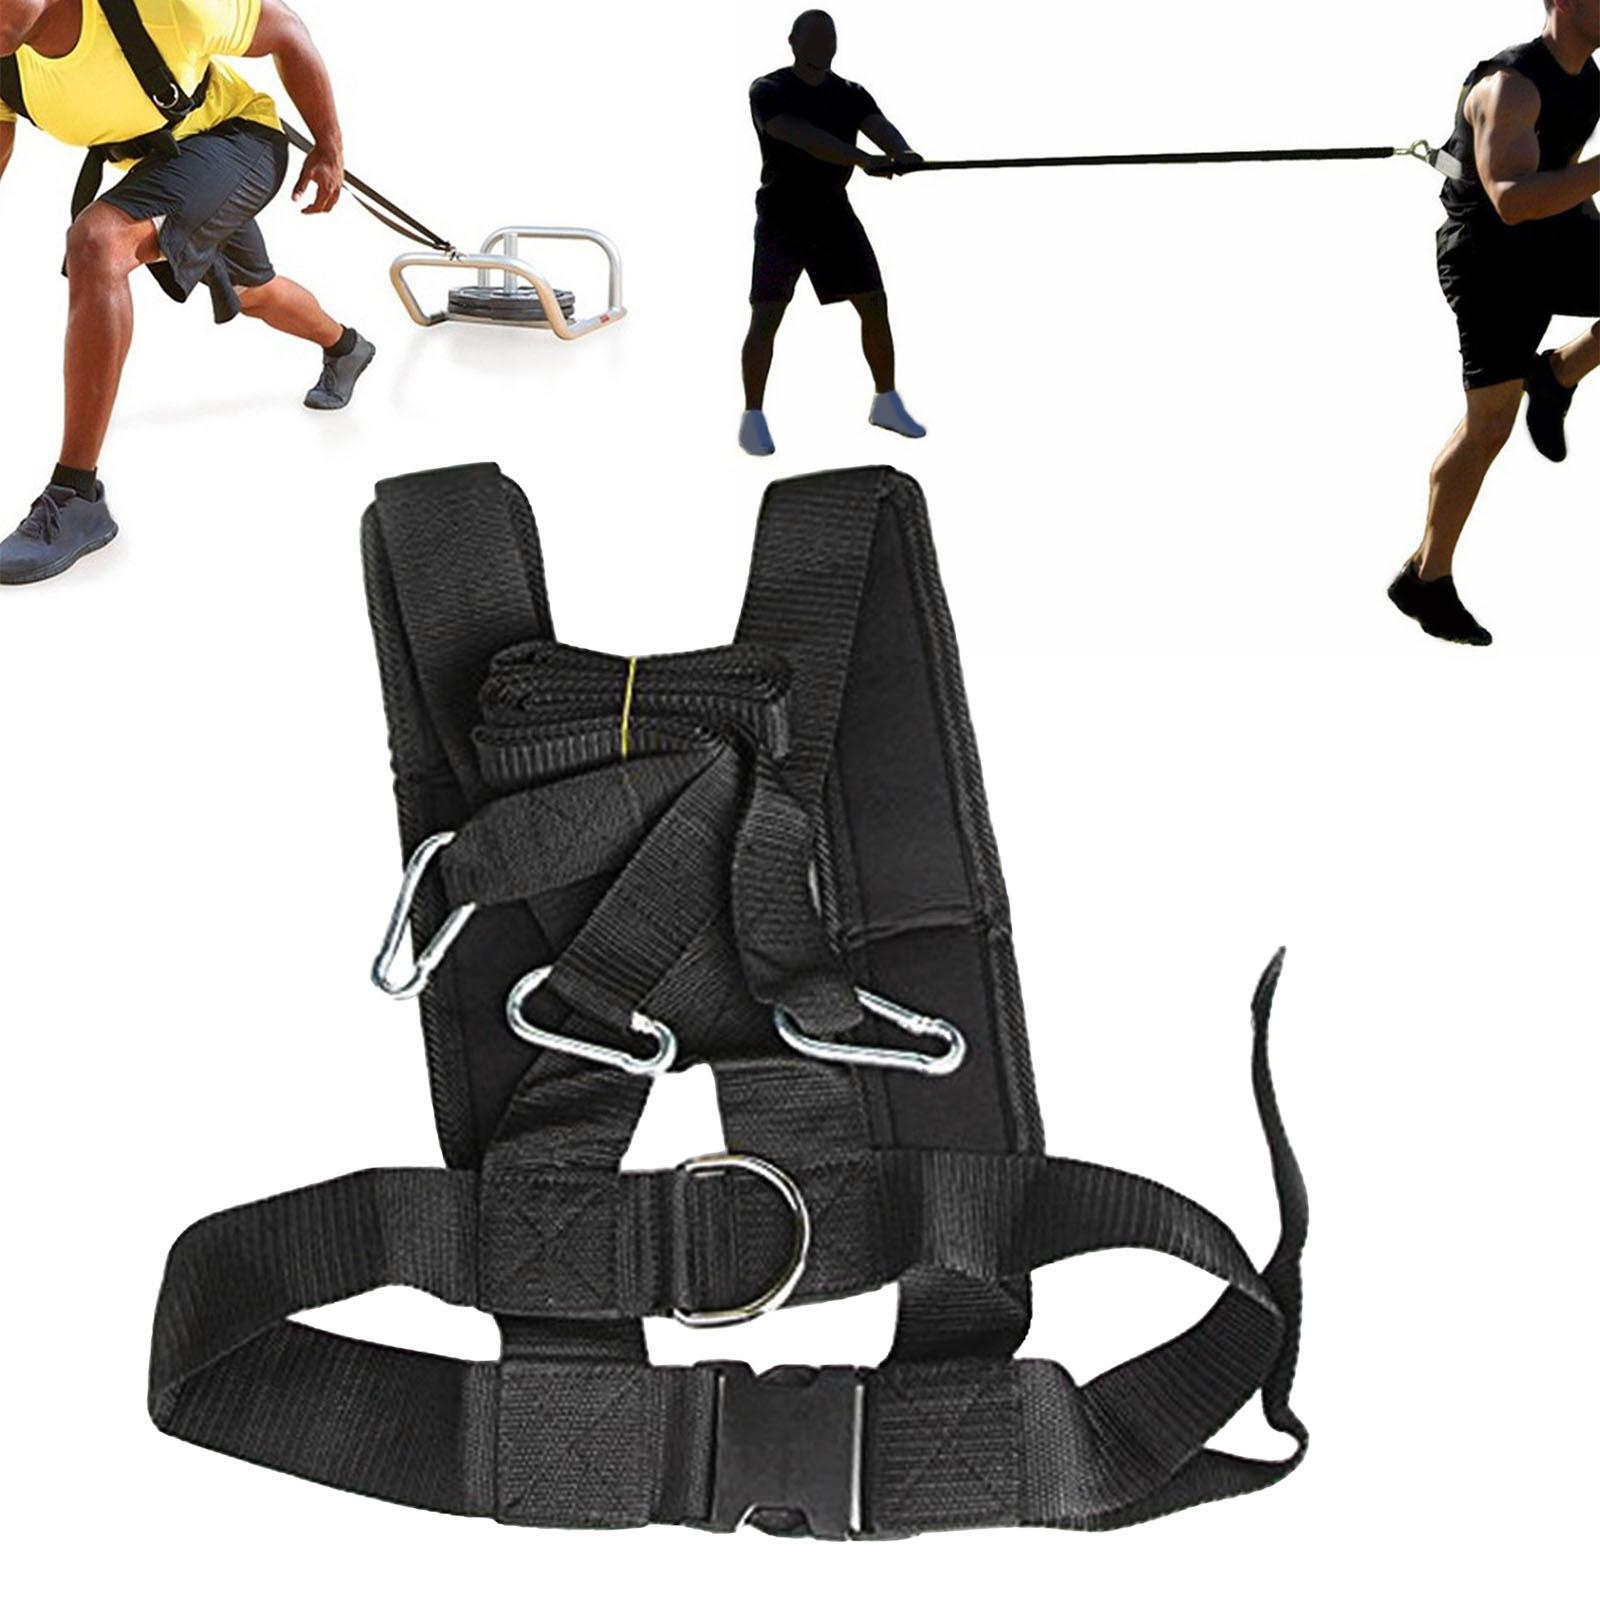 Harness Trainer Shoulder Strap Sled Weight Resistance Training for Football Normal